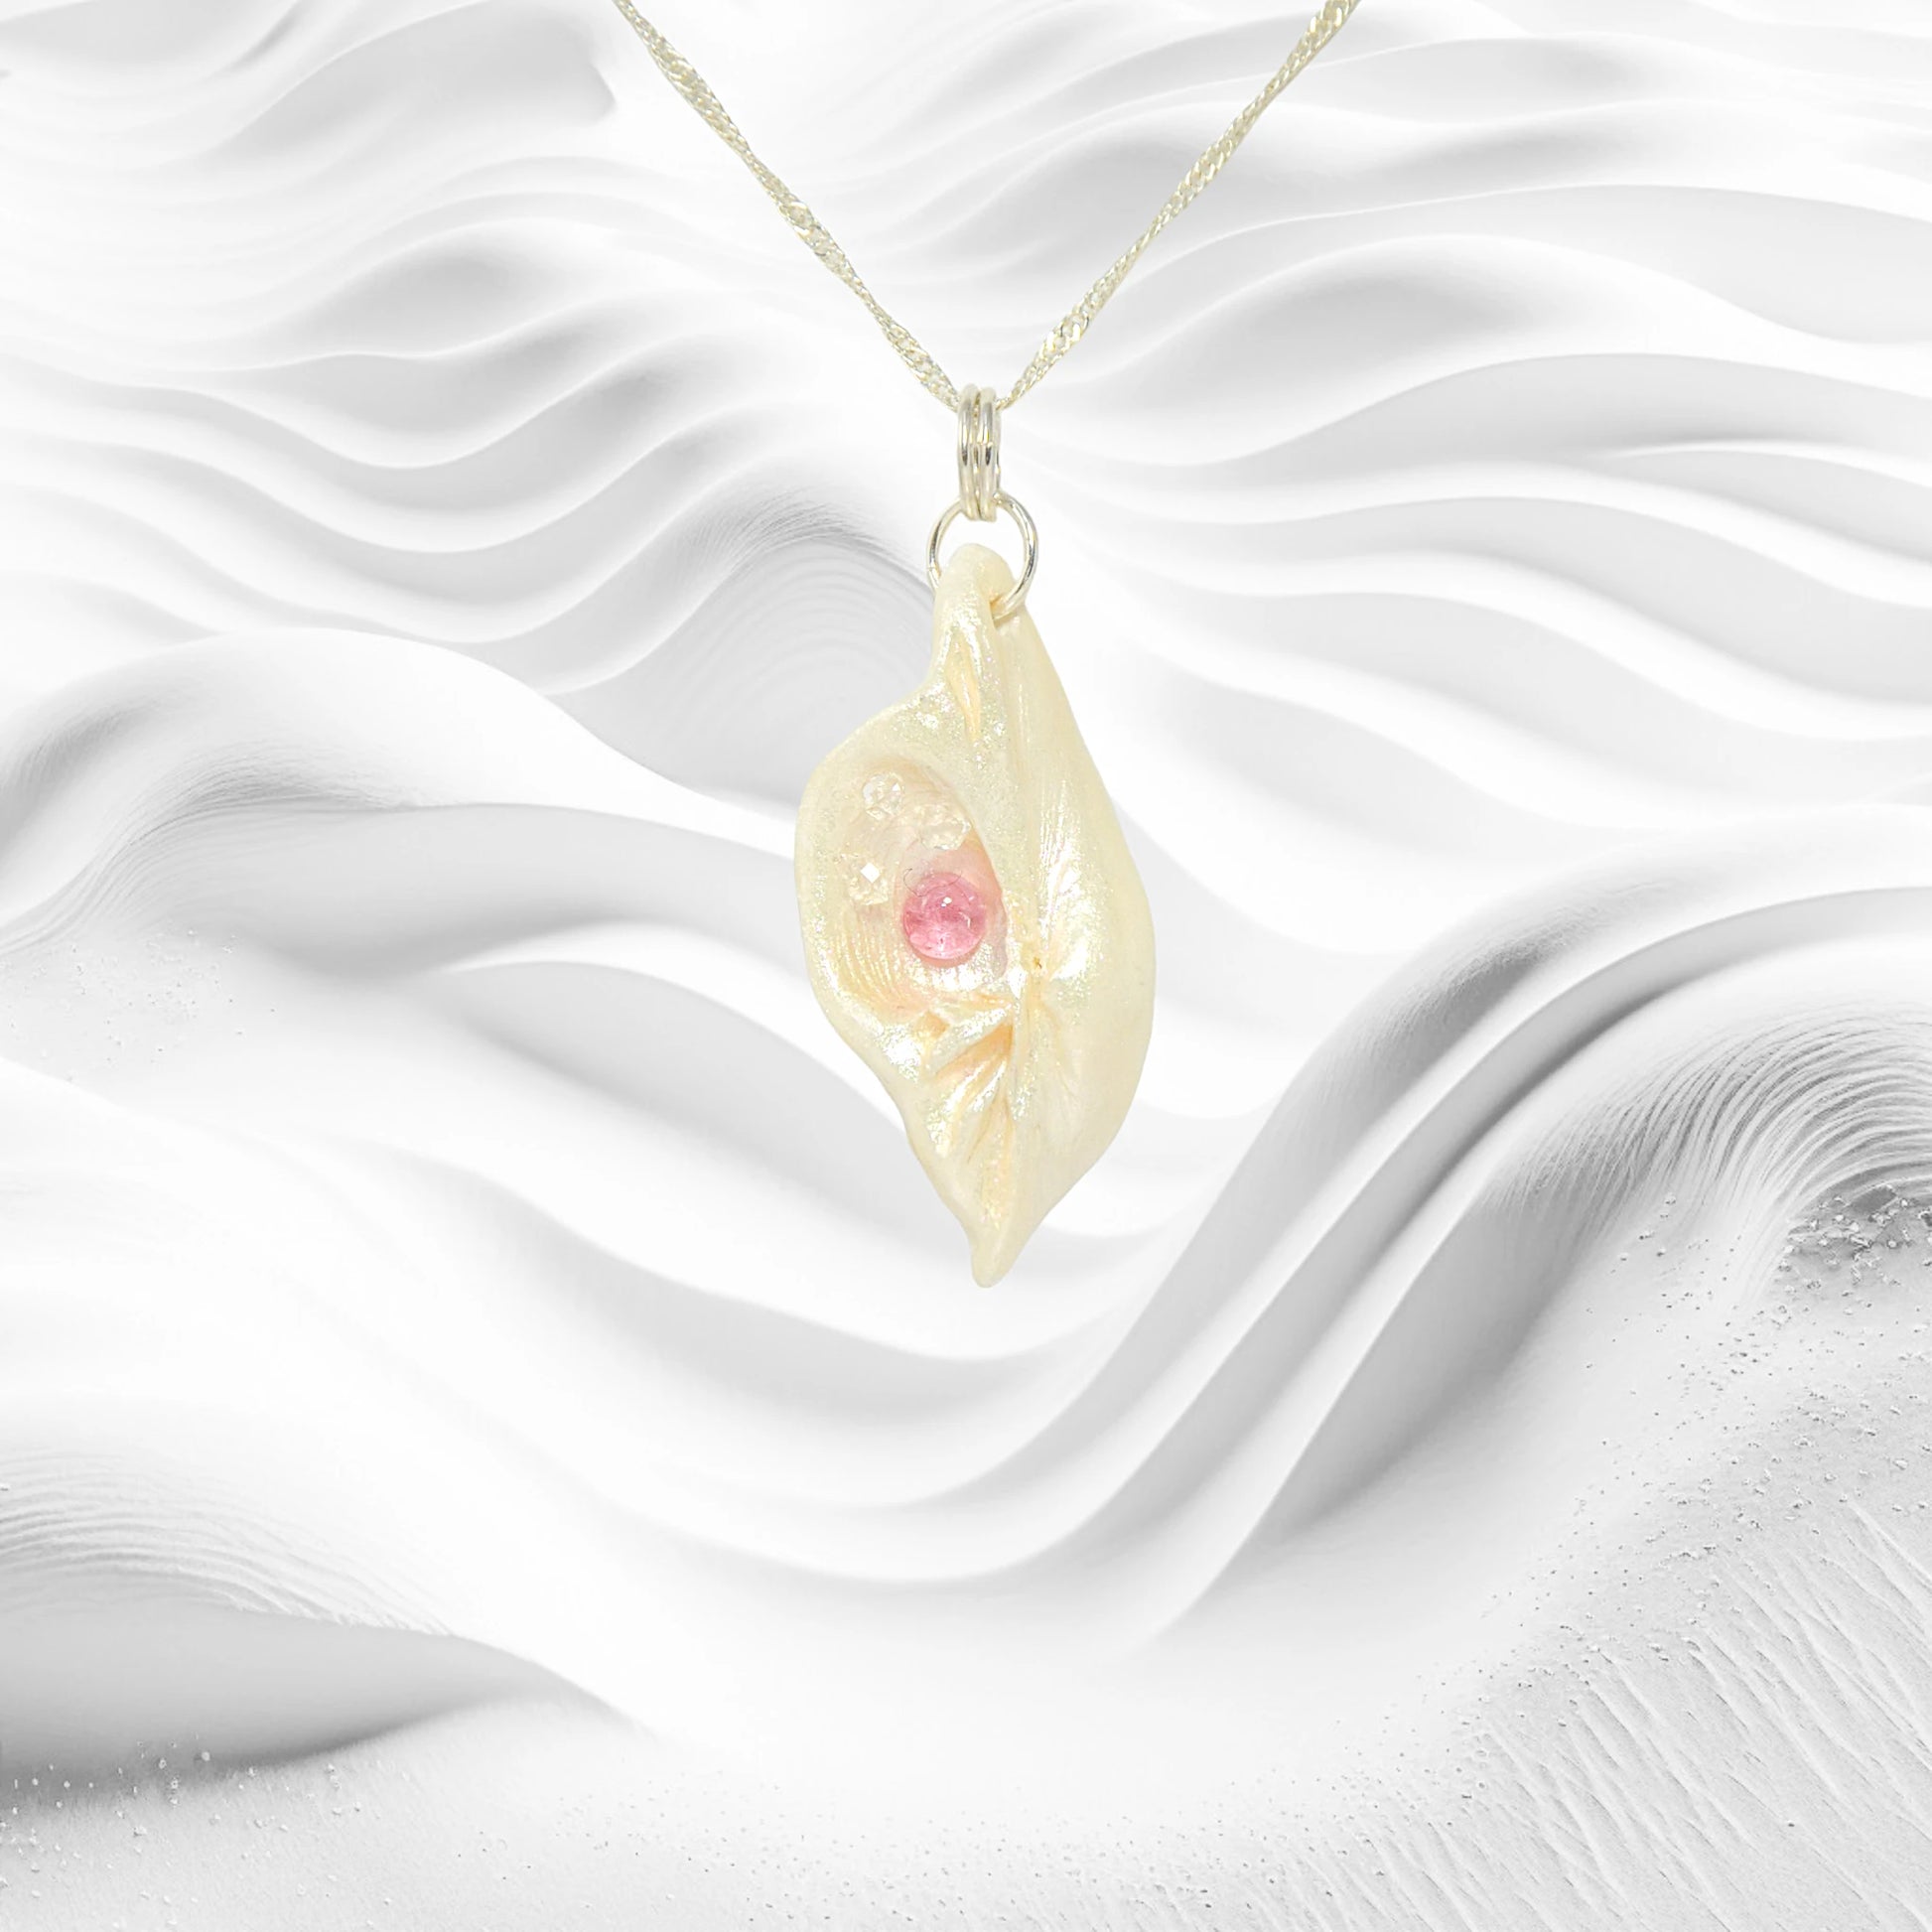 This natural seashell pendant has Pink Tourmaline gemstone and three Herkimer Diamonds that compliments the pendant.